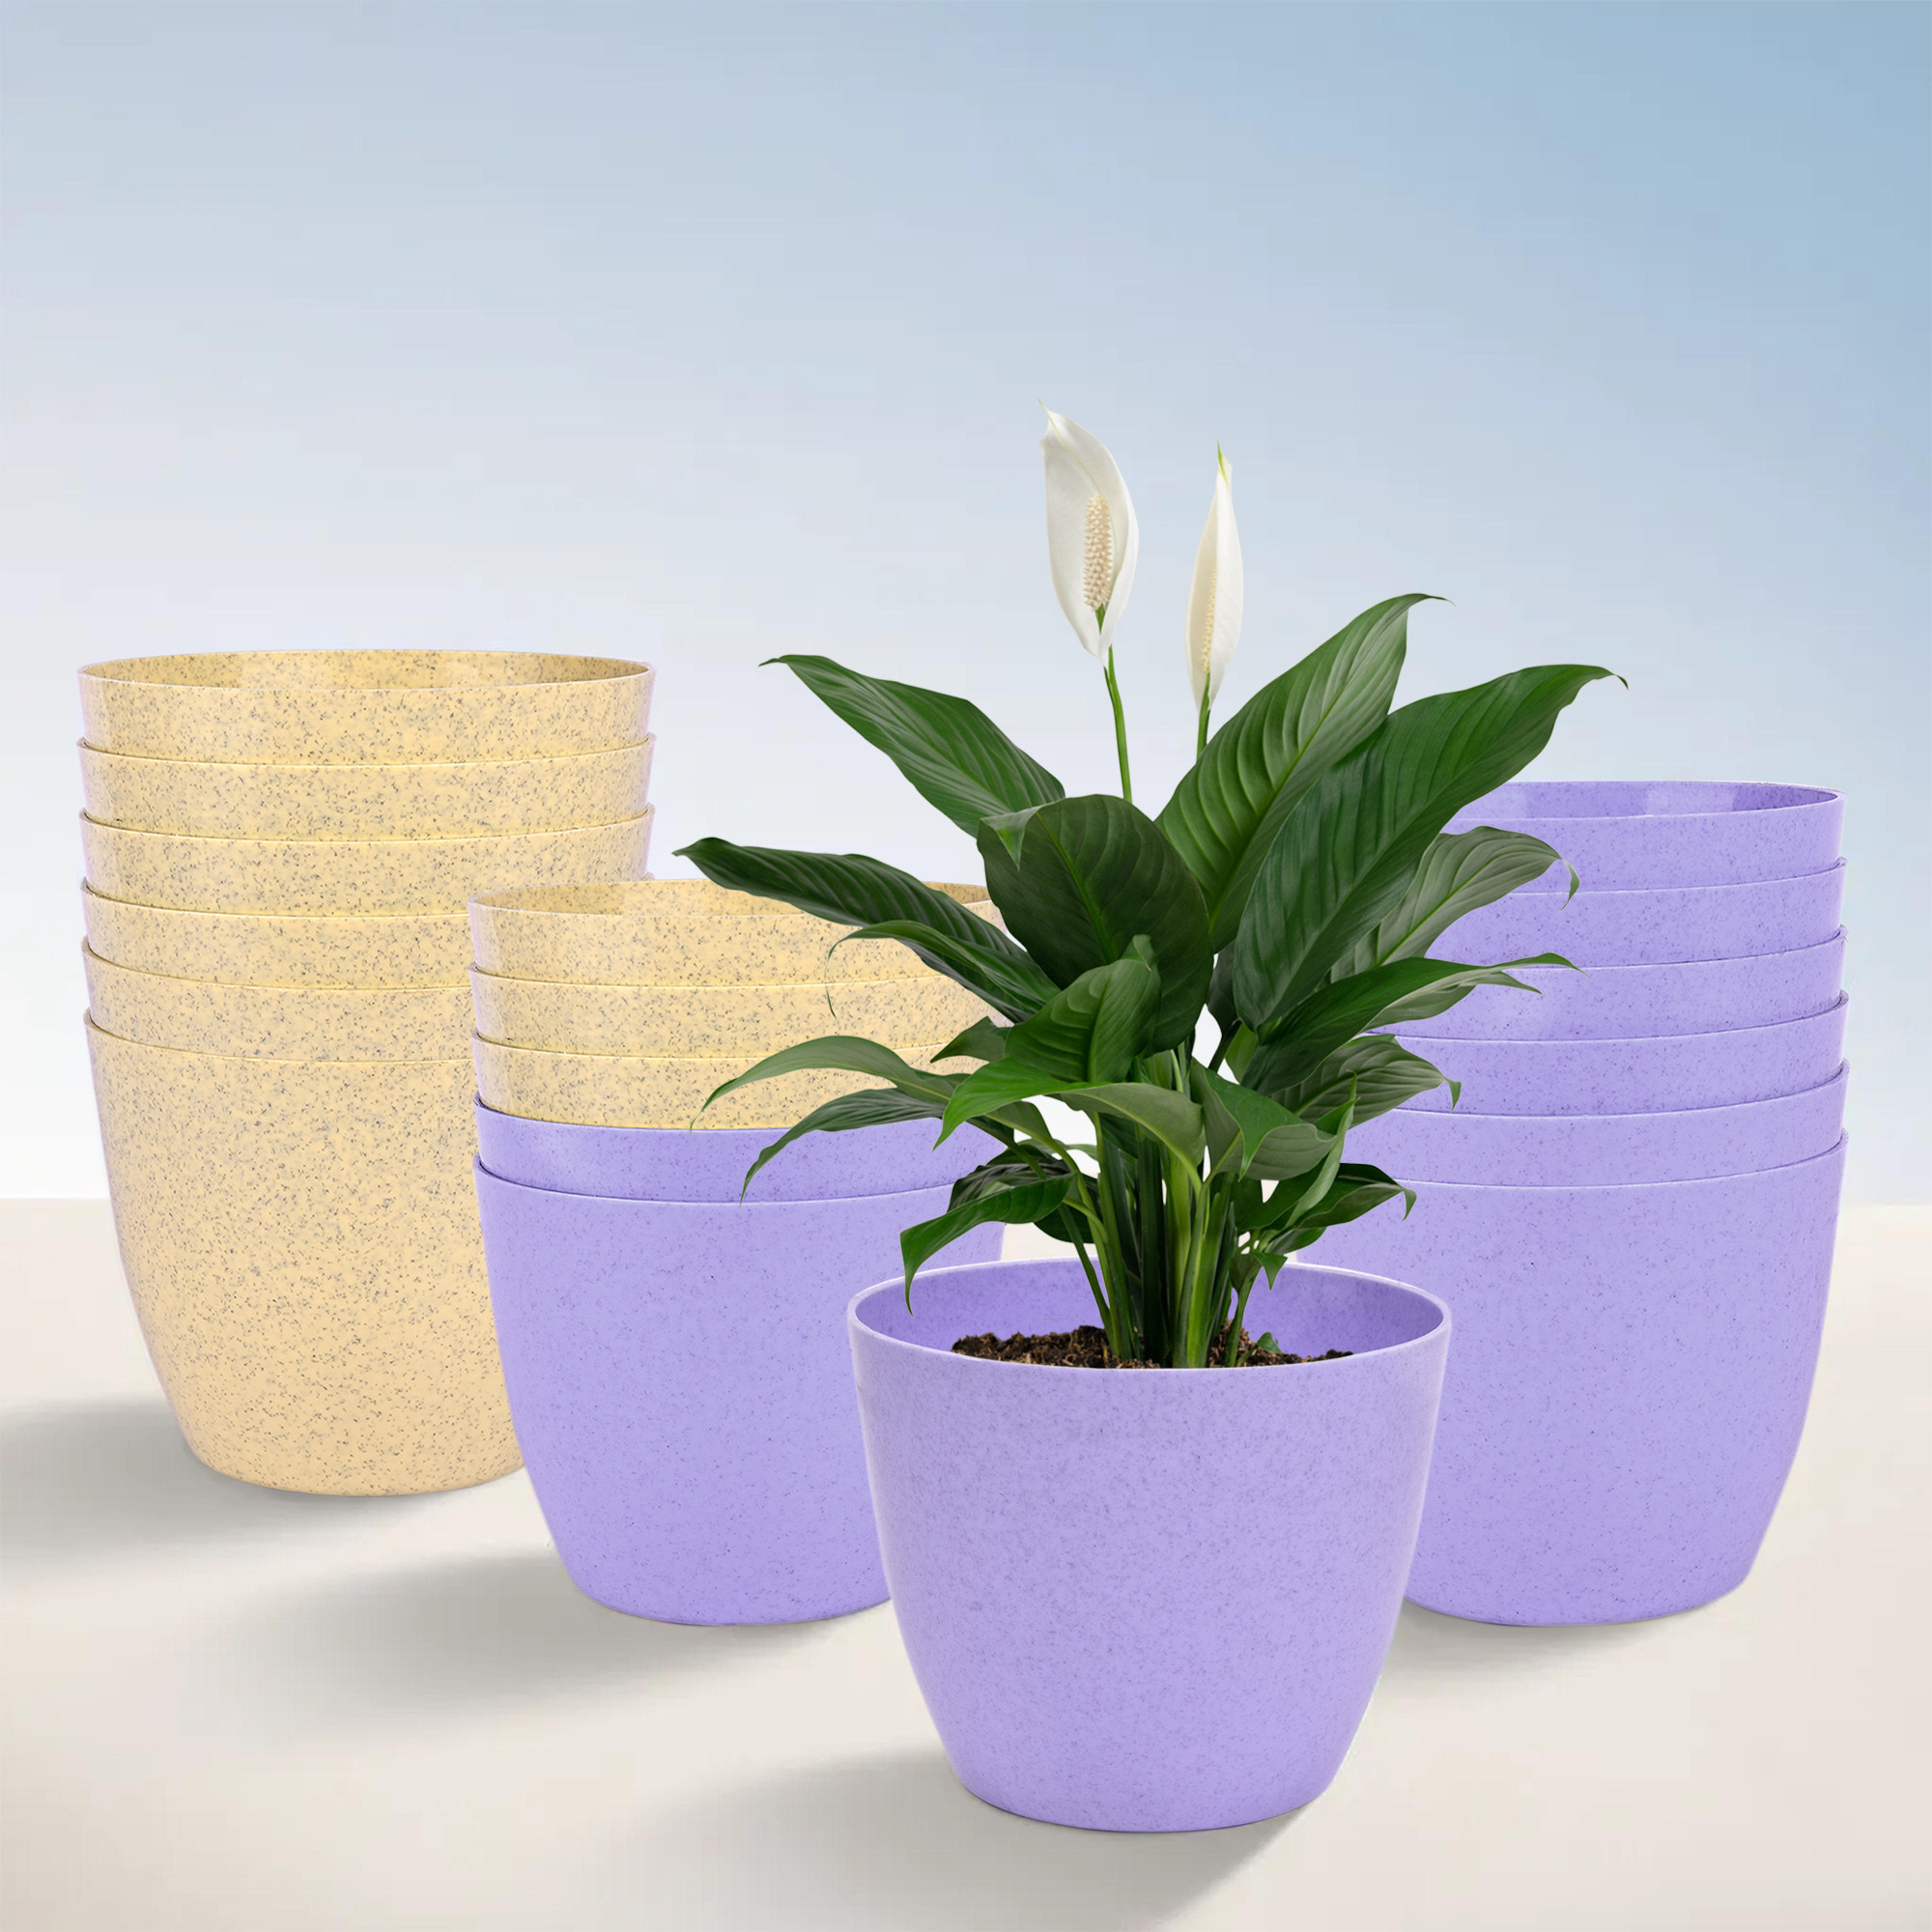 Kuber Industries Flower Pot | Flower Pot for Living Room-Office | Flower Planters for Home-office-Lawns & Garden Décor | Planters Pots for Balcony | Marble Cool | 5 Inch | Purple & Beige